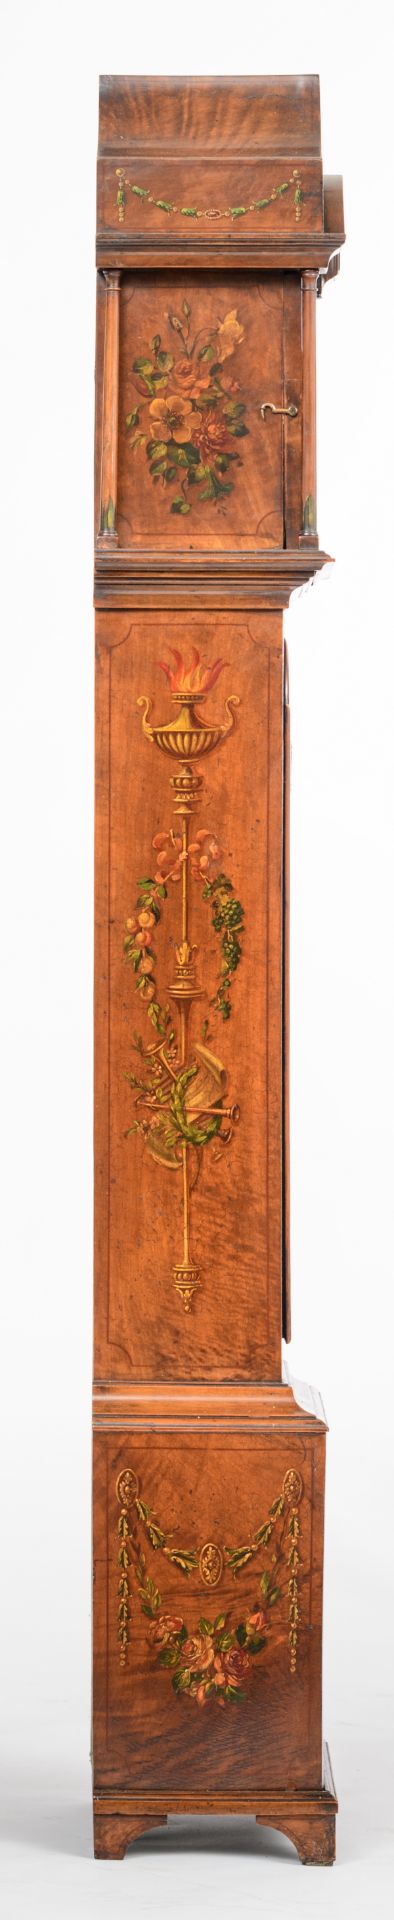 A fine mahogany veneered Victorian longcase clock, polychrome decorated with handpainted grotesques, - Image 4 of 15